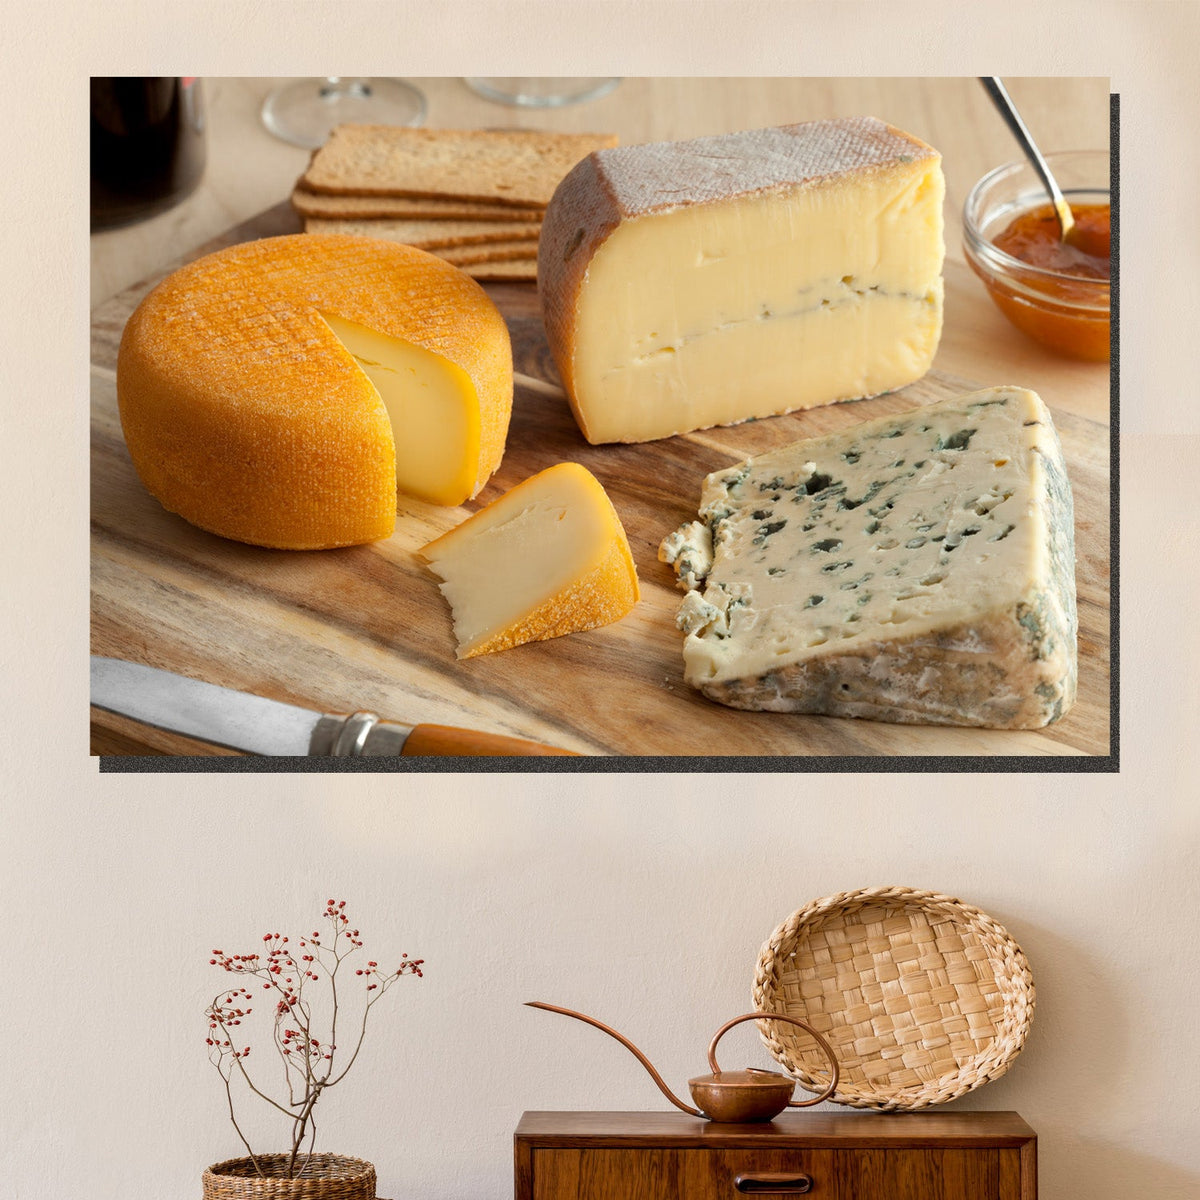 https://cdn.shopify.com/s/files/1/0387/9986/8044/products/FrenchCheesePlatterCanvasArtprintStretched-3.jpg